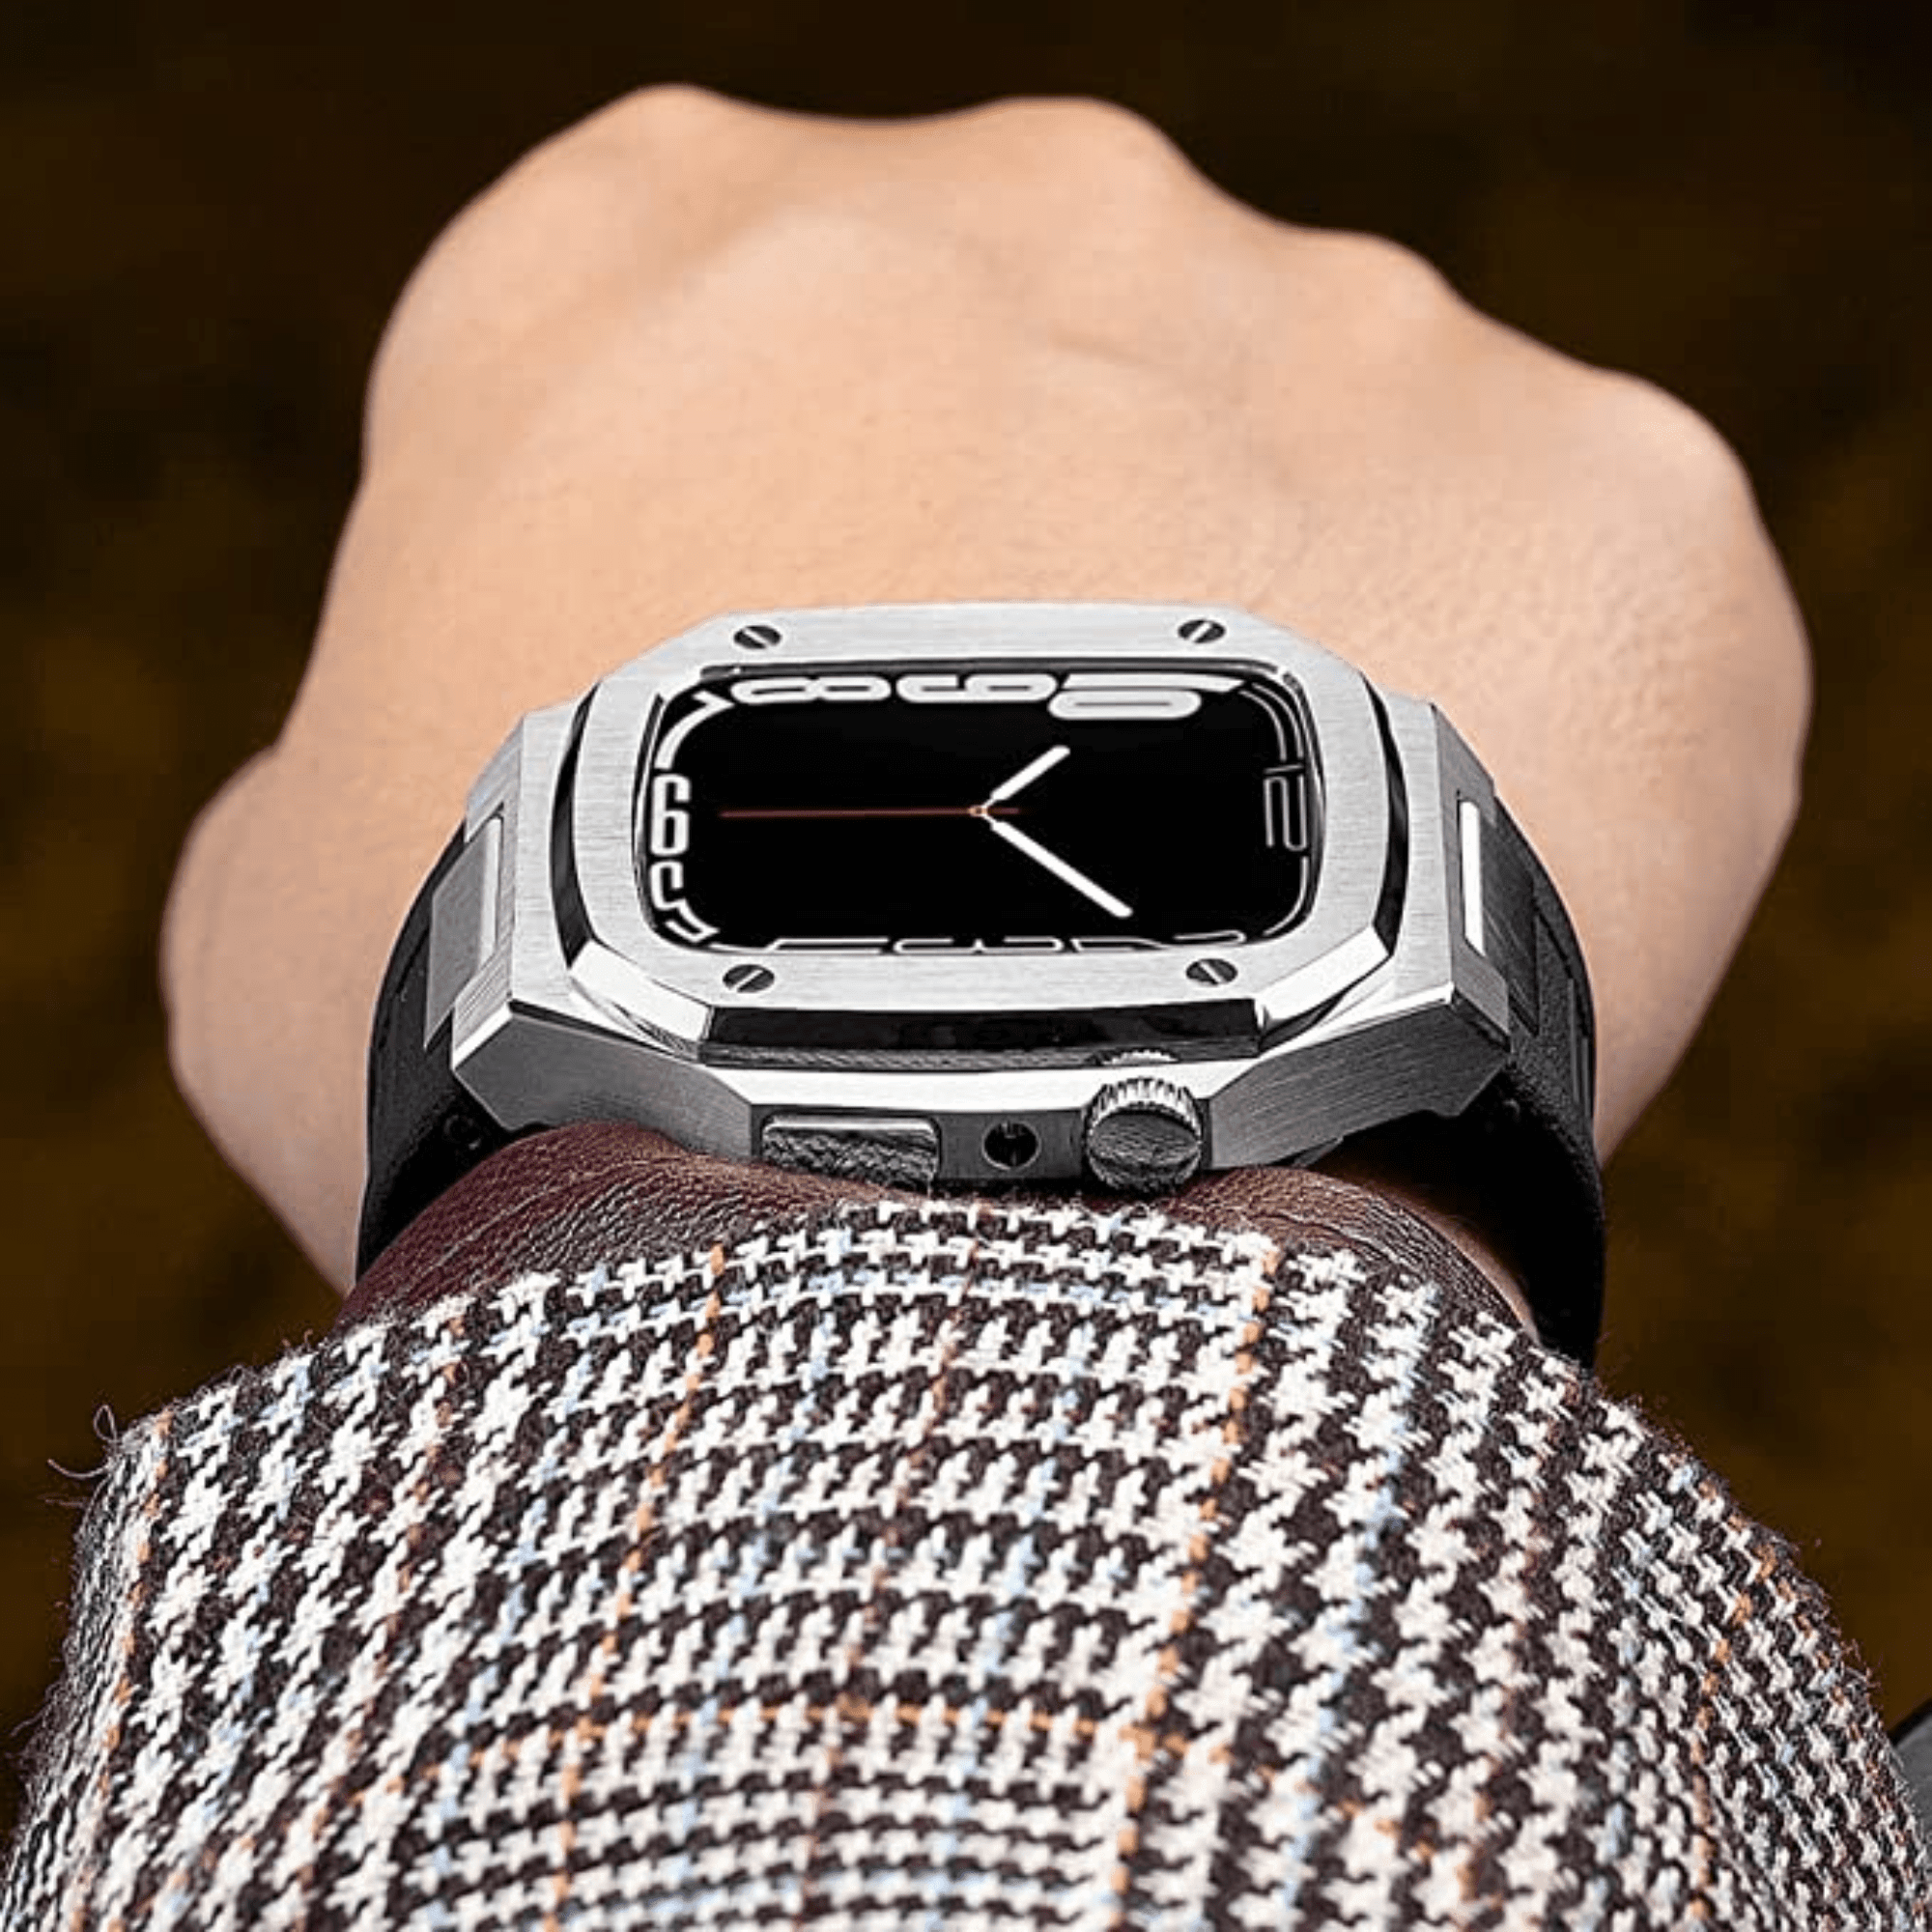 Luxury Metal Mod Kit for Apple Watch | Leather & Stainless Steel Straps | Apple Watch 7/8 accessory 45 mm| Silver Case - Silver Band mod kits india dream watches apple watch